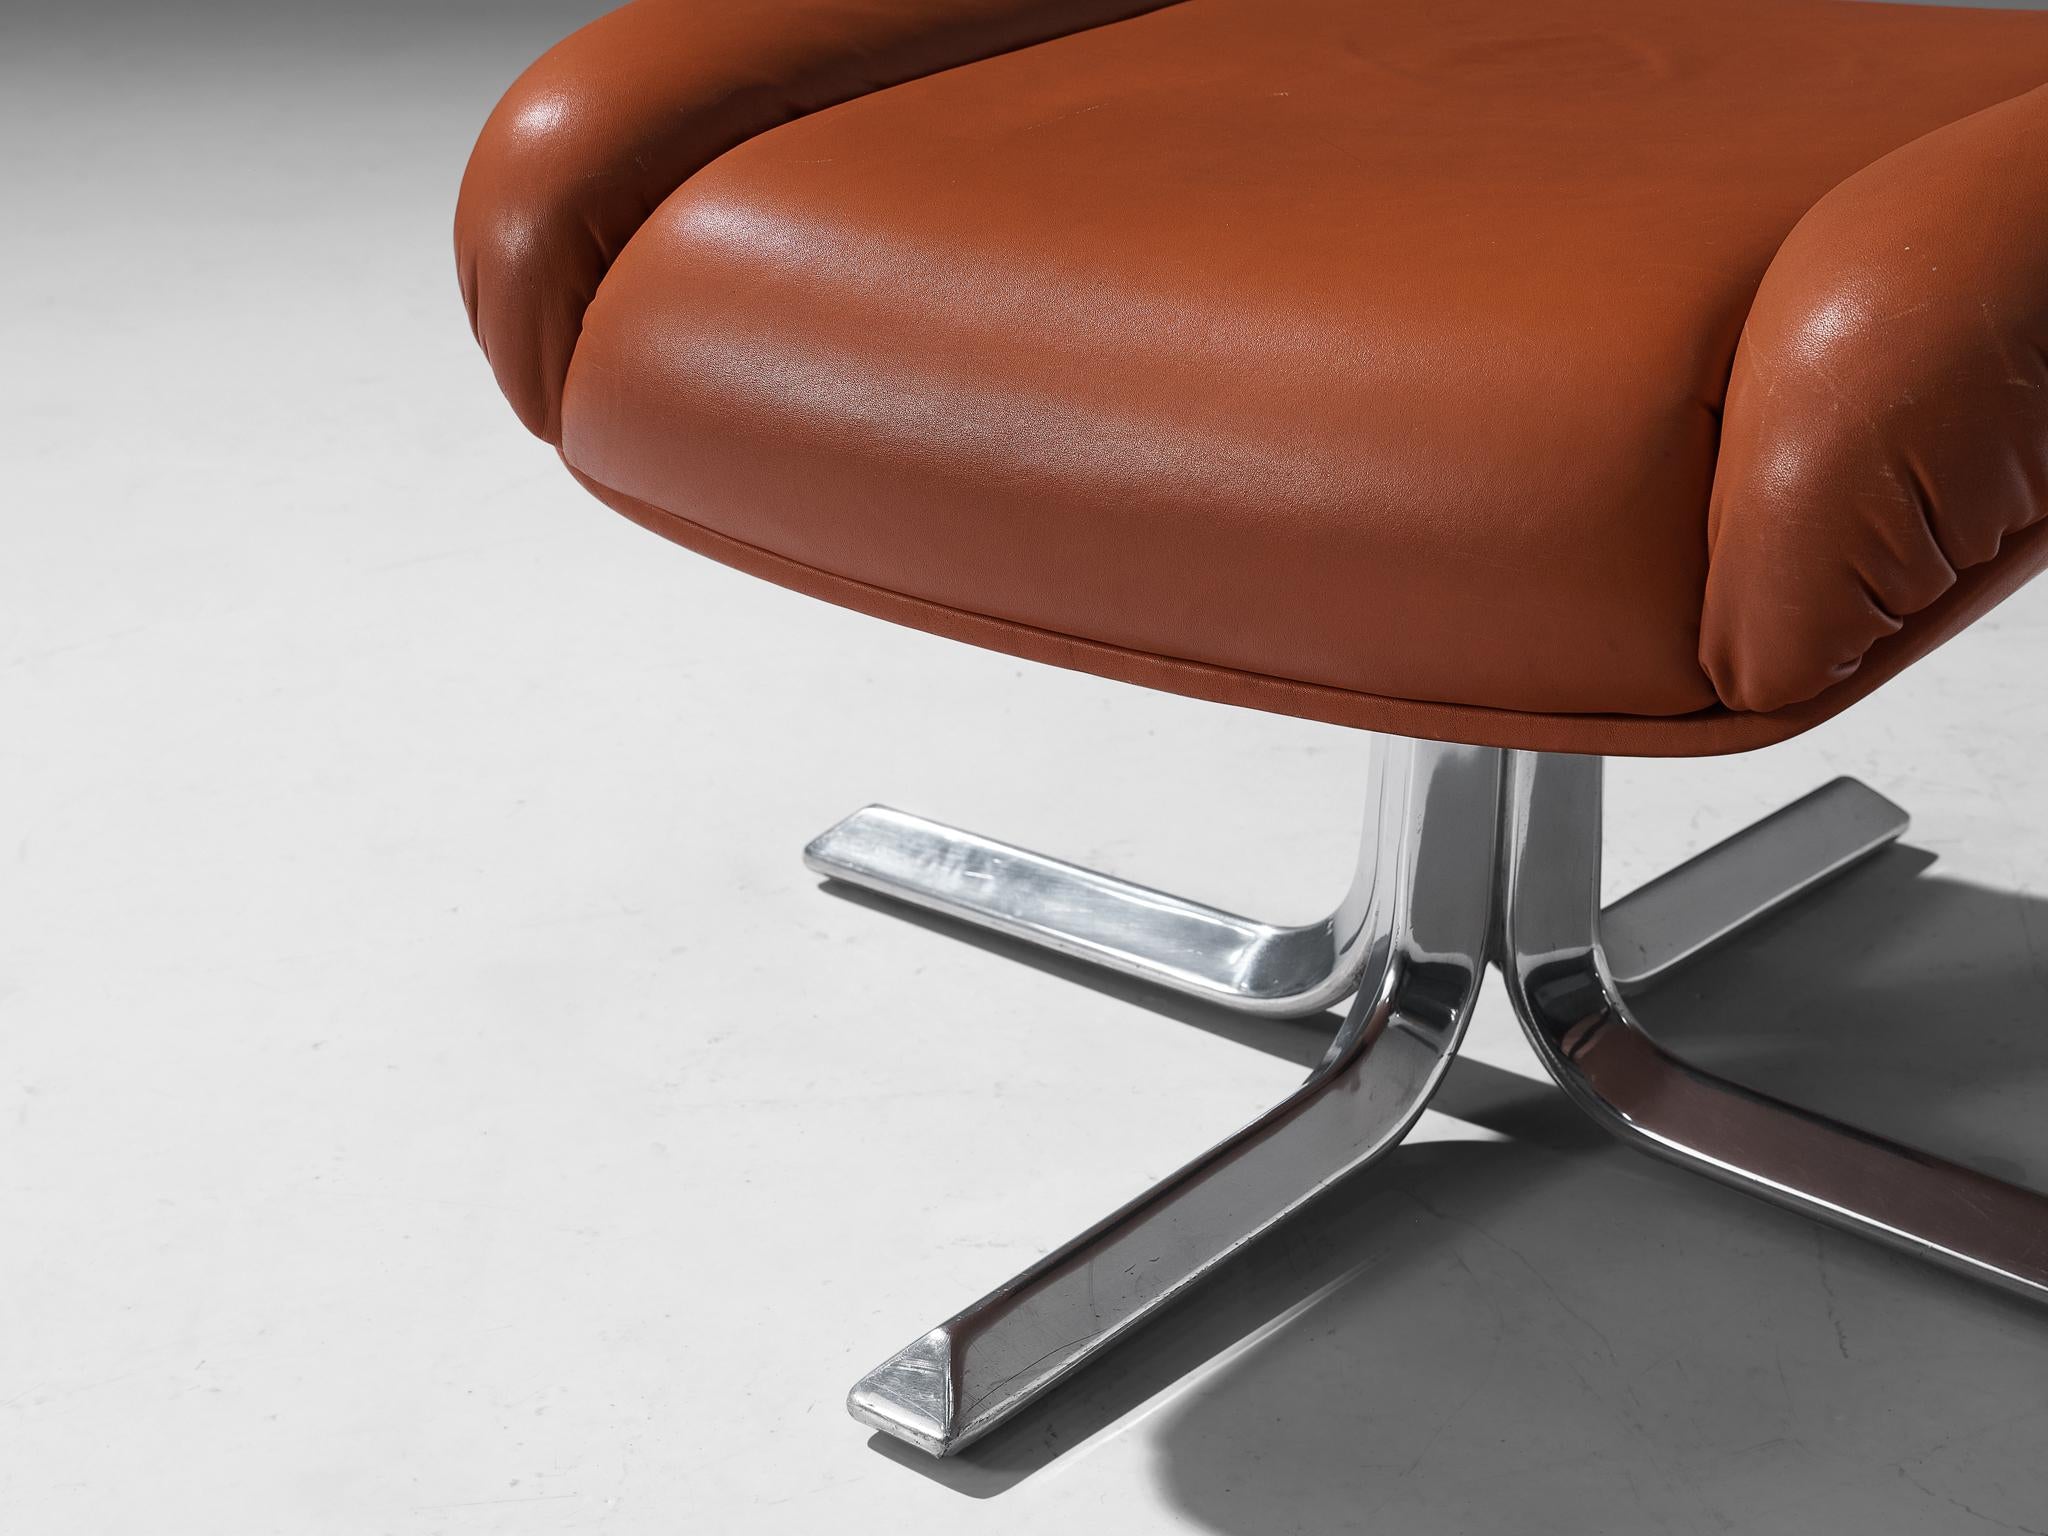 Footstool in Chrome and Cognac Leather